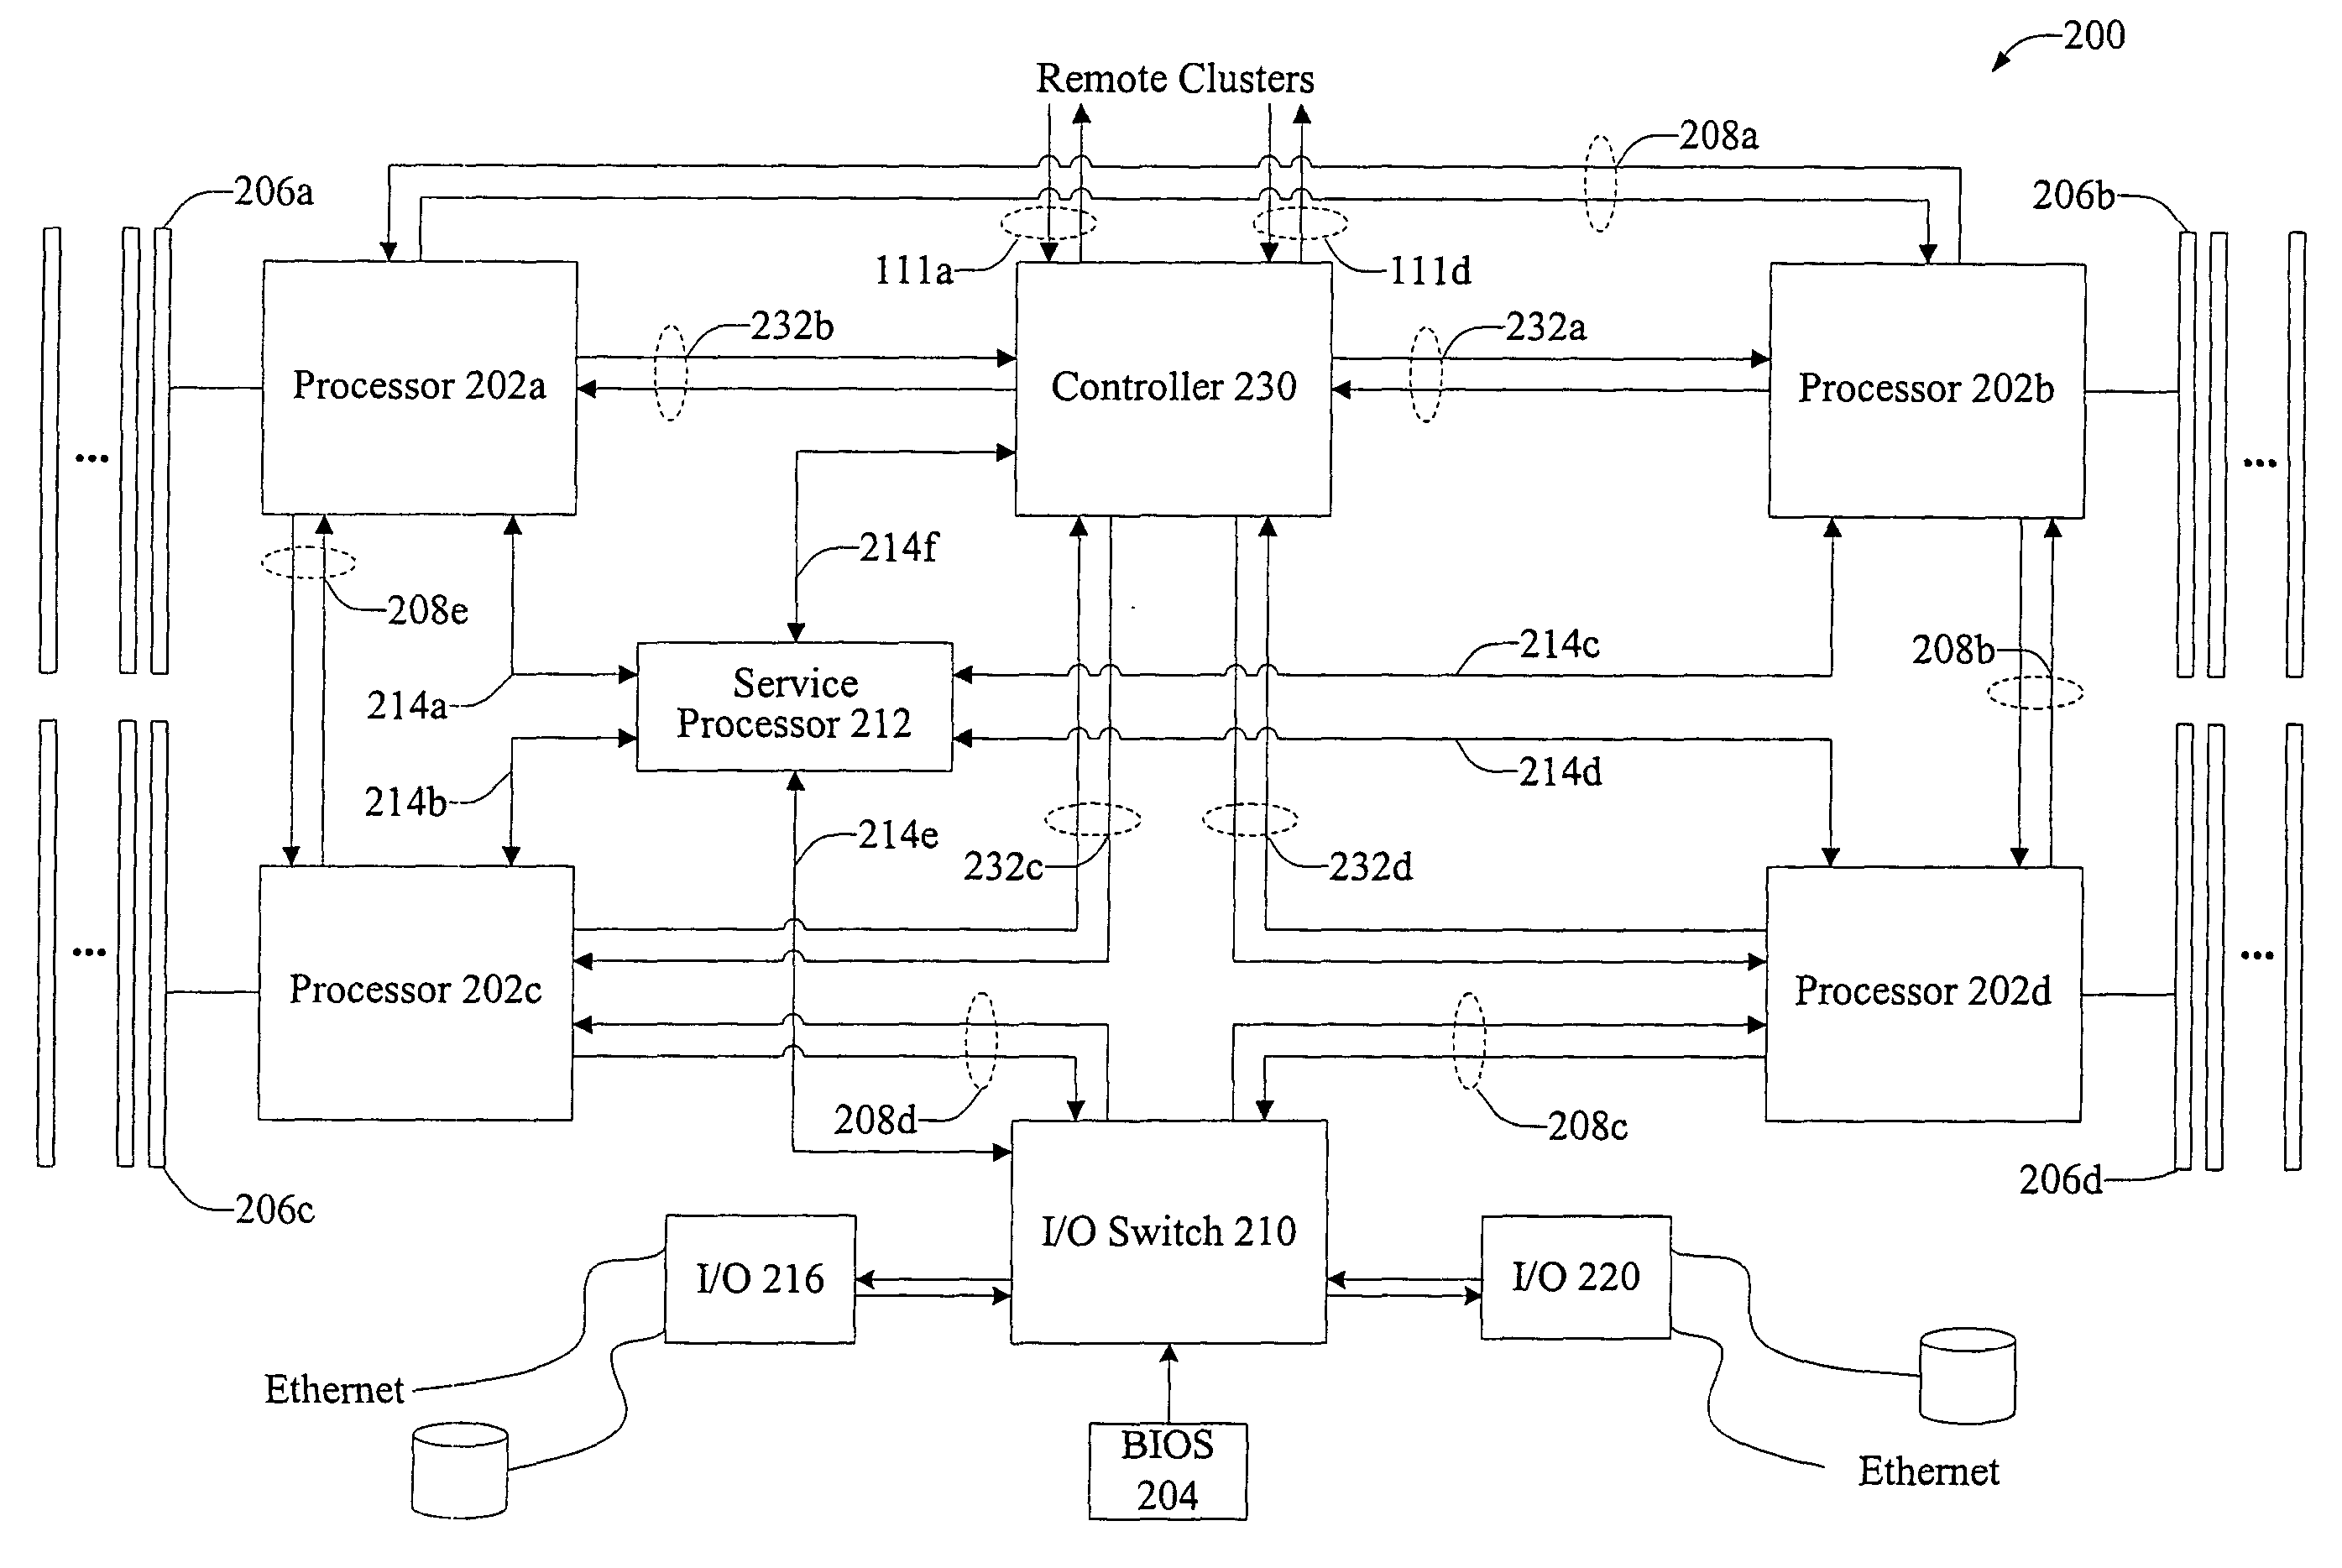 Synchronized communication between multi-processor clusters of multi-cluster computer systems